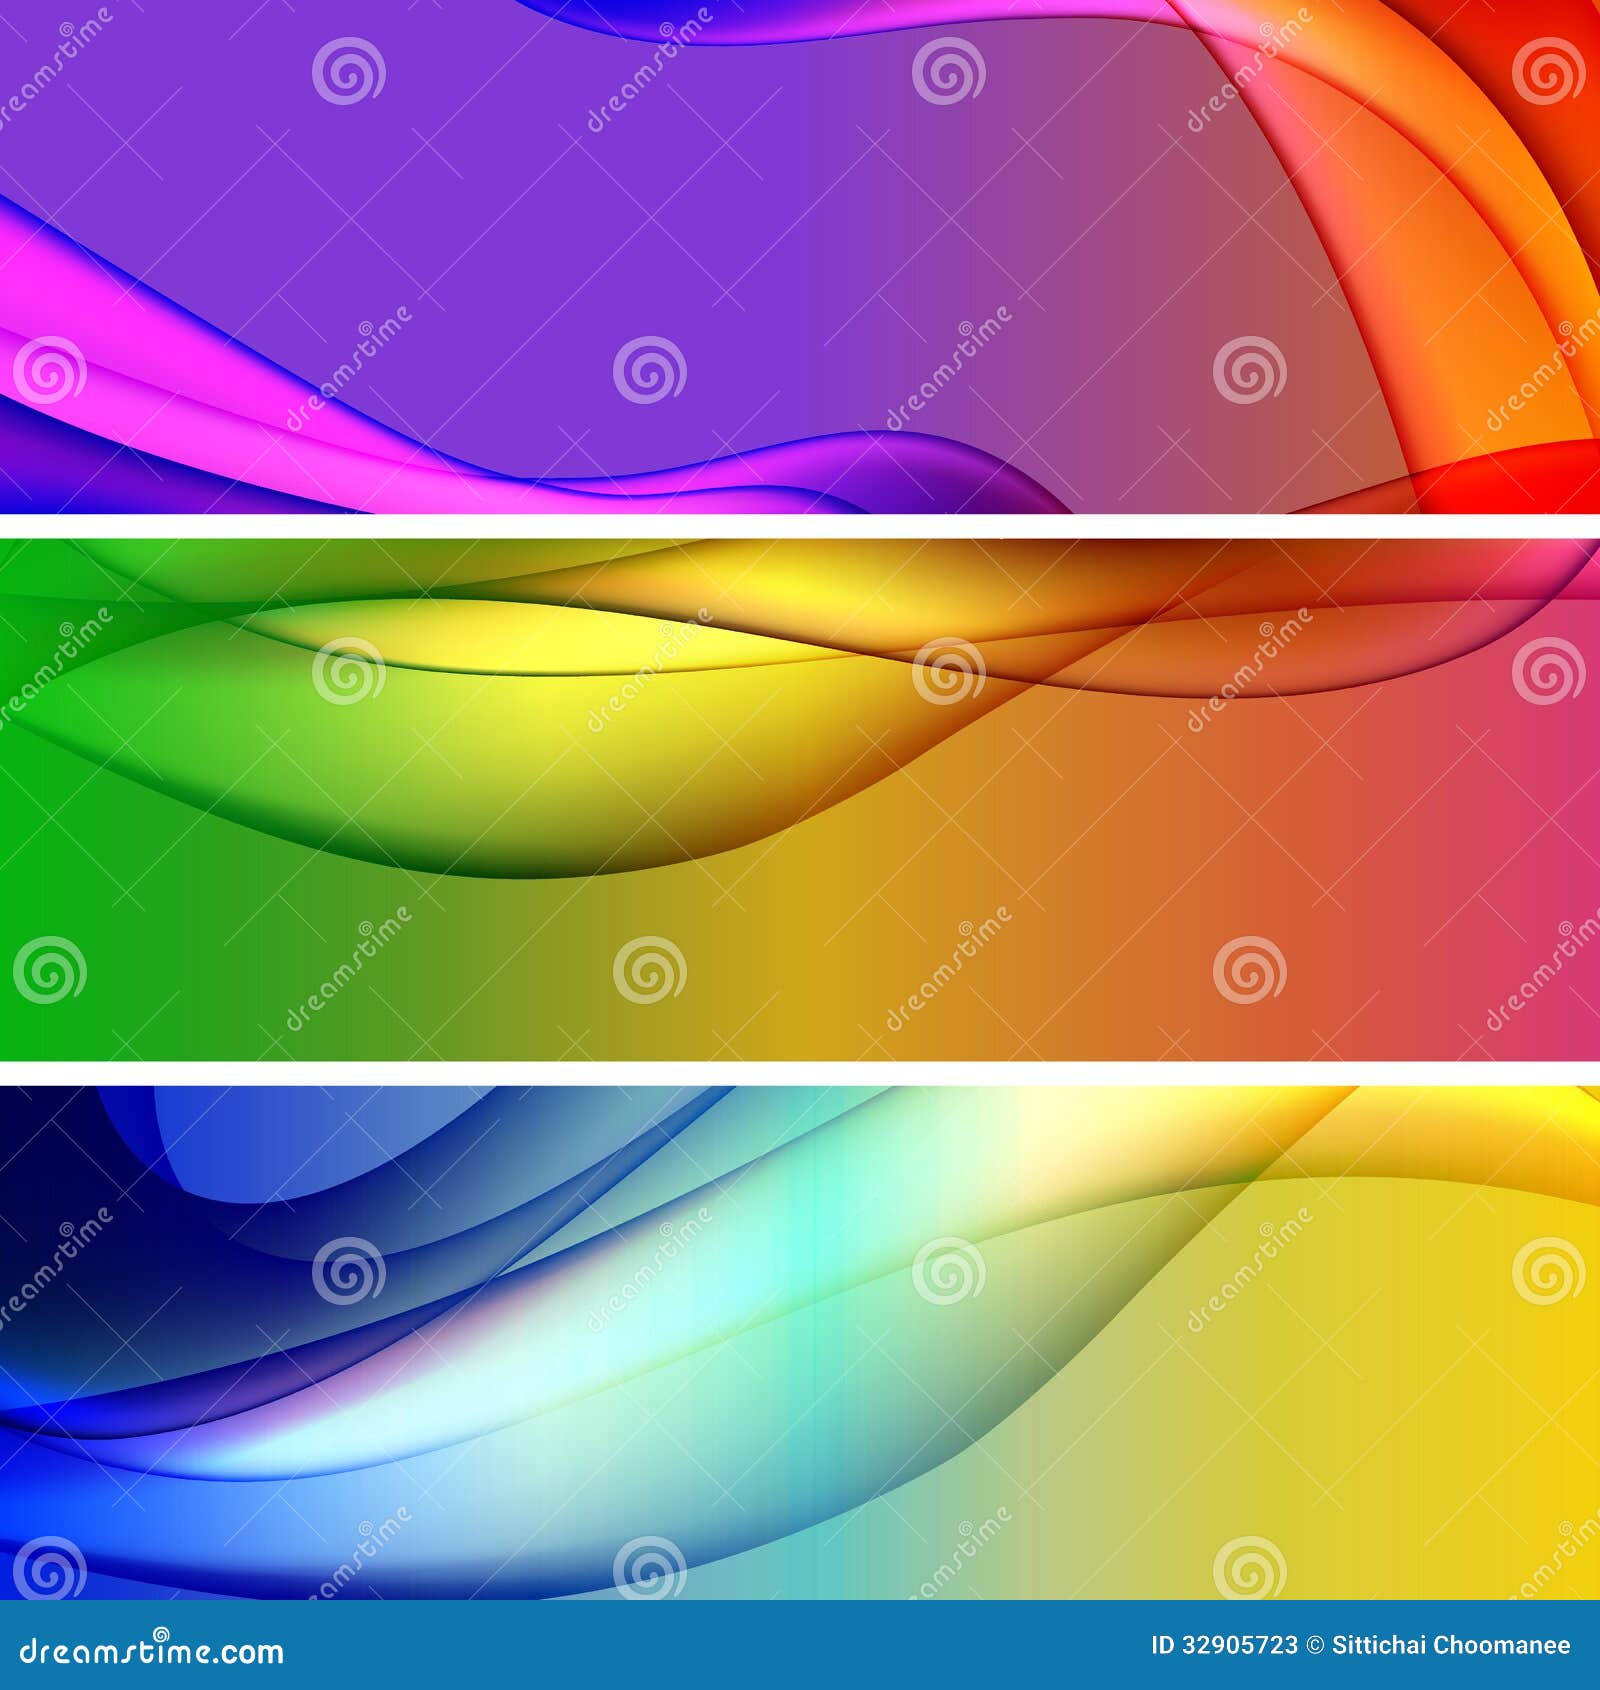 Vectors Colorful Web  Banners  Backgrounds  Stock Vector 